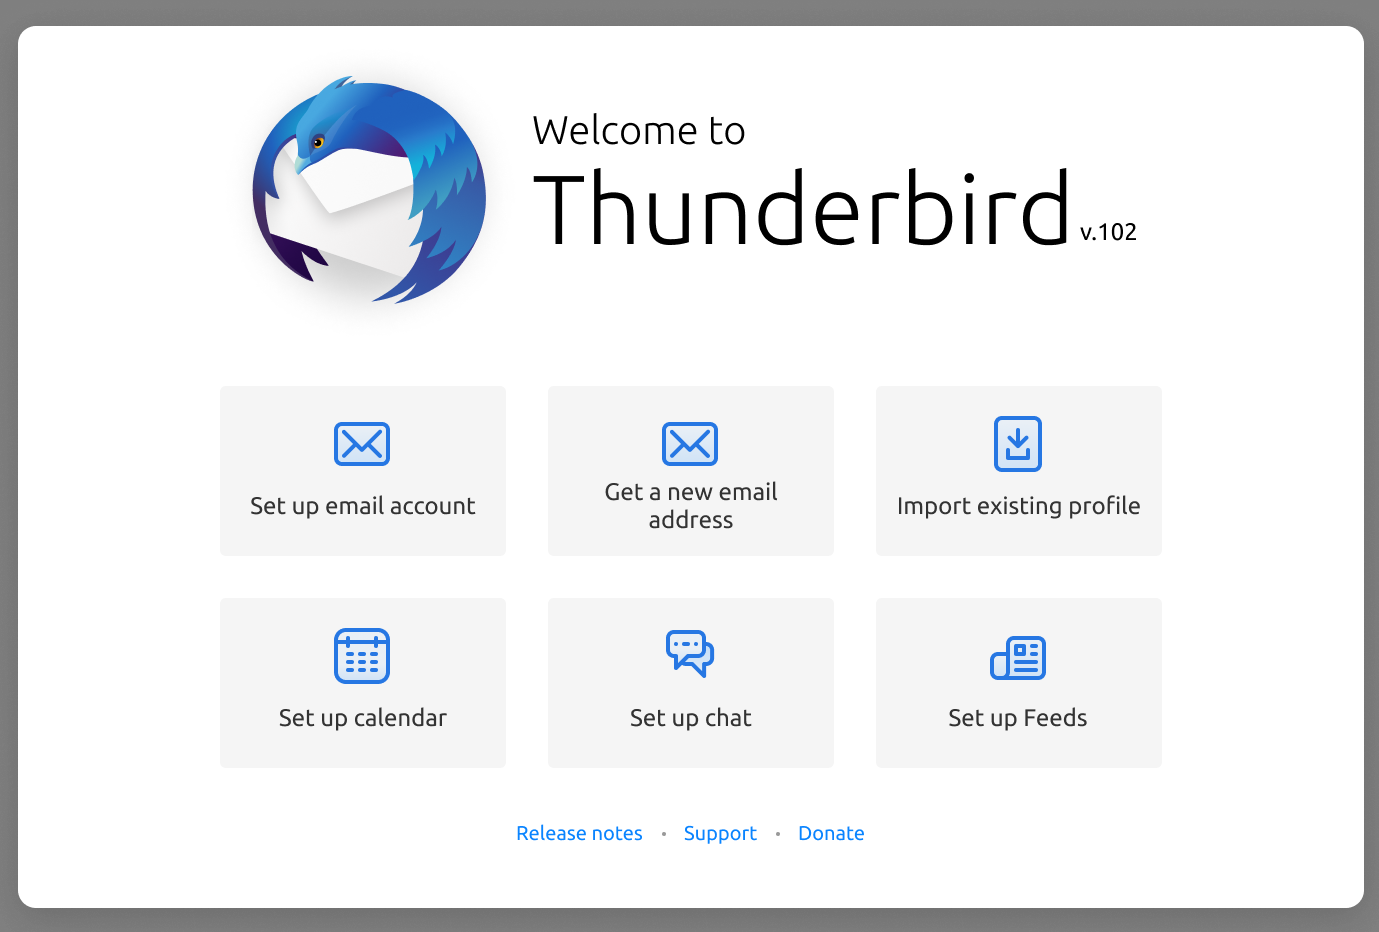 Welcome back to the Thunderbird blog! We’re really energized about our major 2022 release and cannot wait to put it in your hands. Thunderbird 1